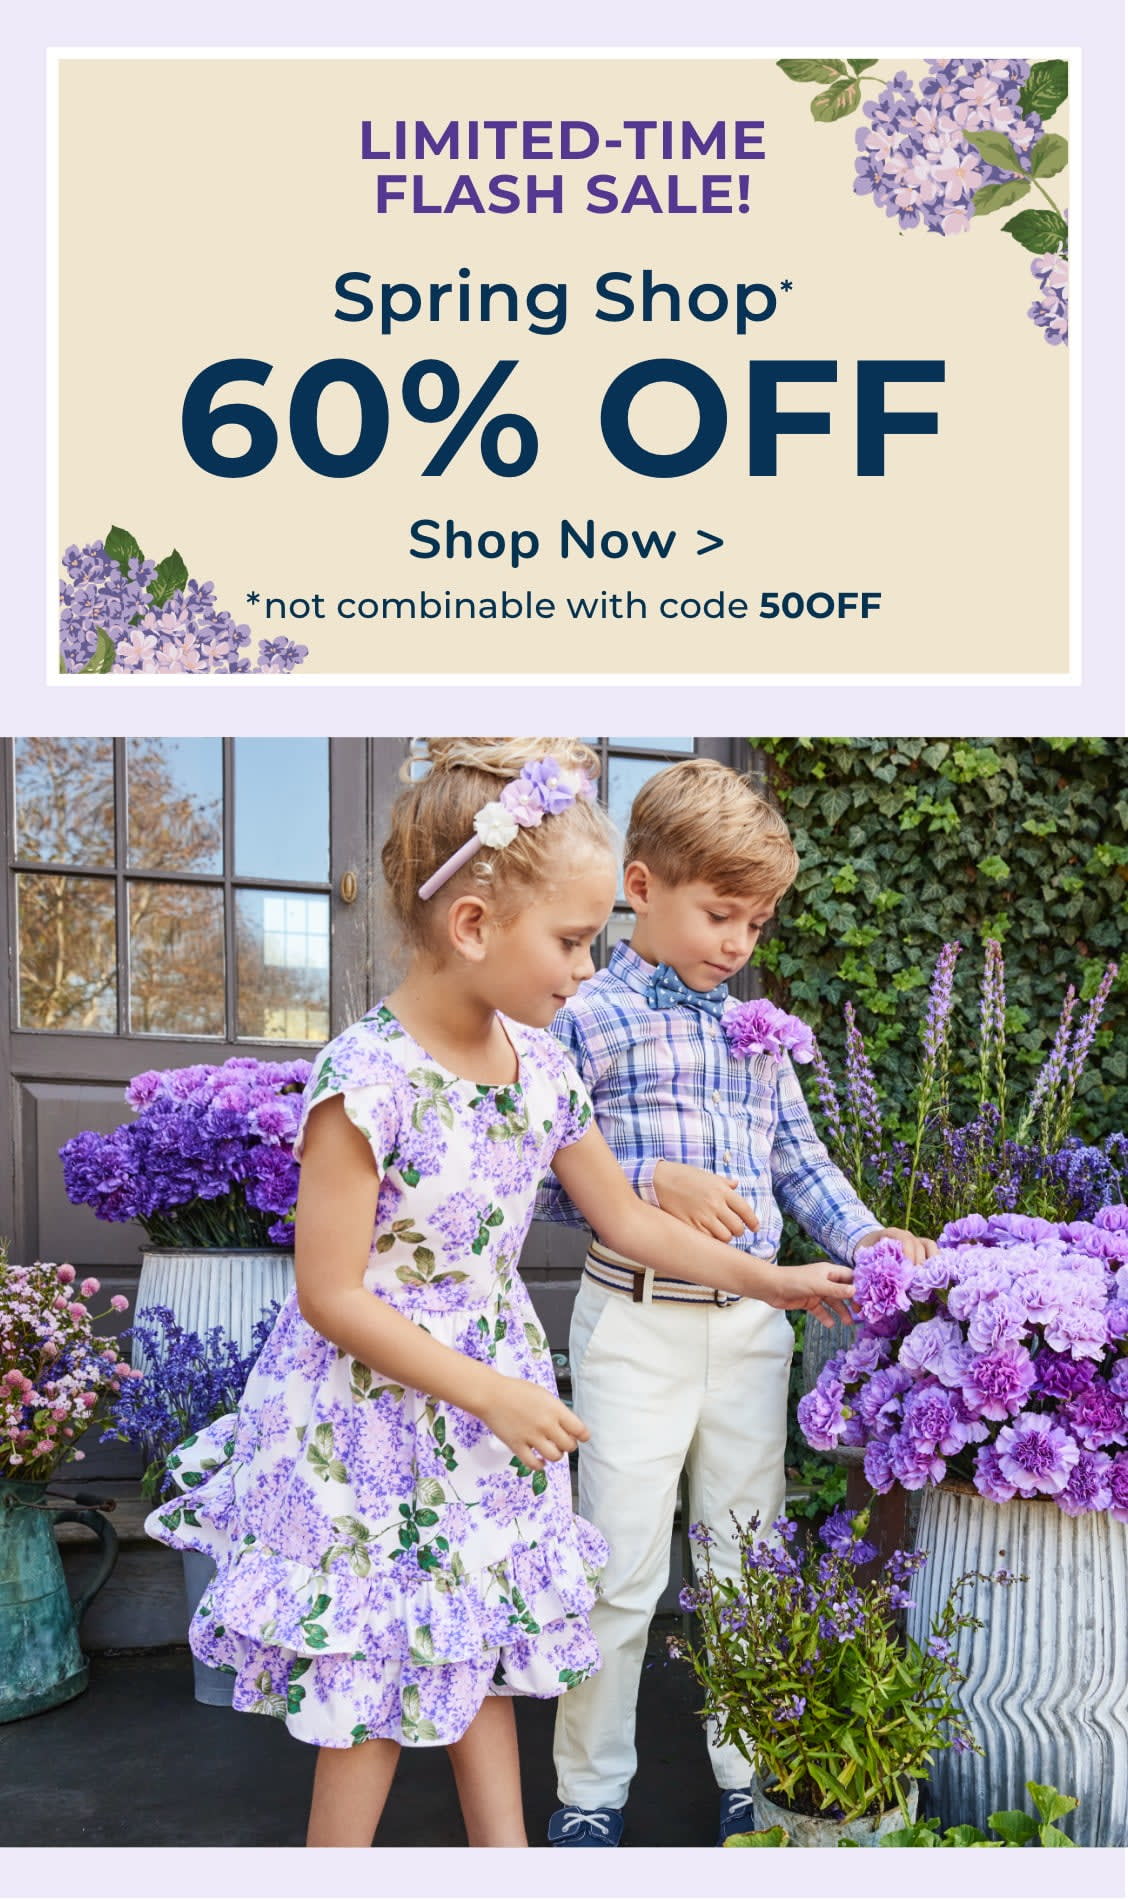 75% Off Gymboree Clothing for the Family + Free Shipping, Halloween, Fall  & Thanksgiving Styles